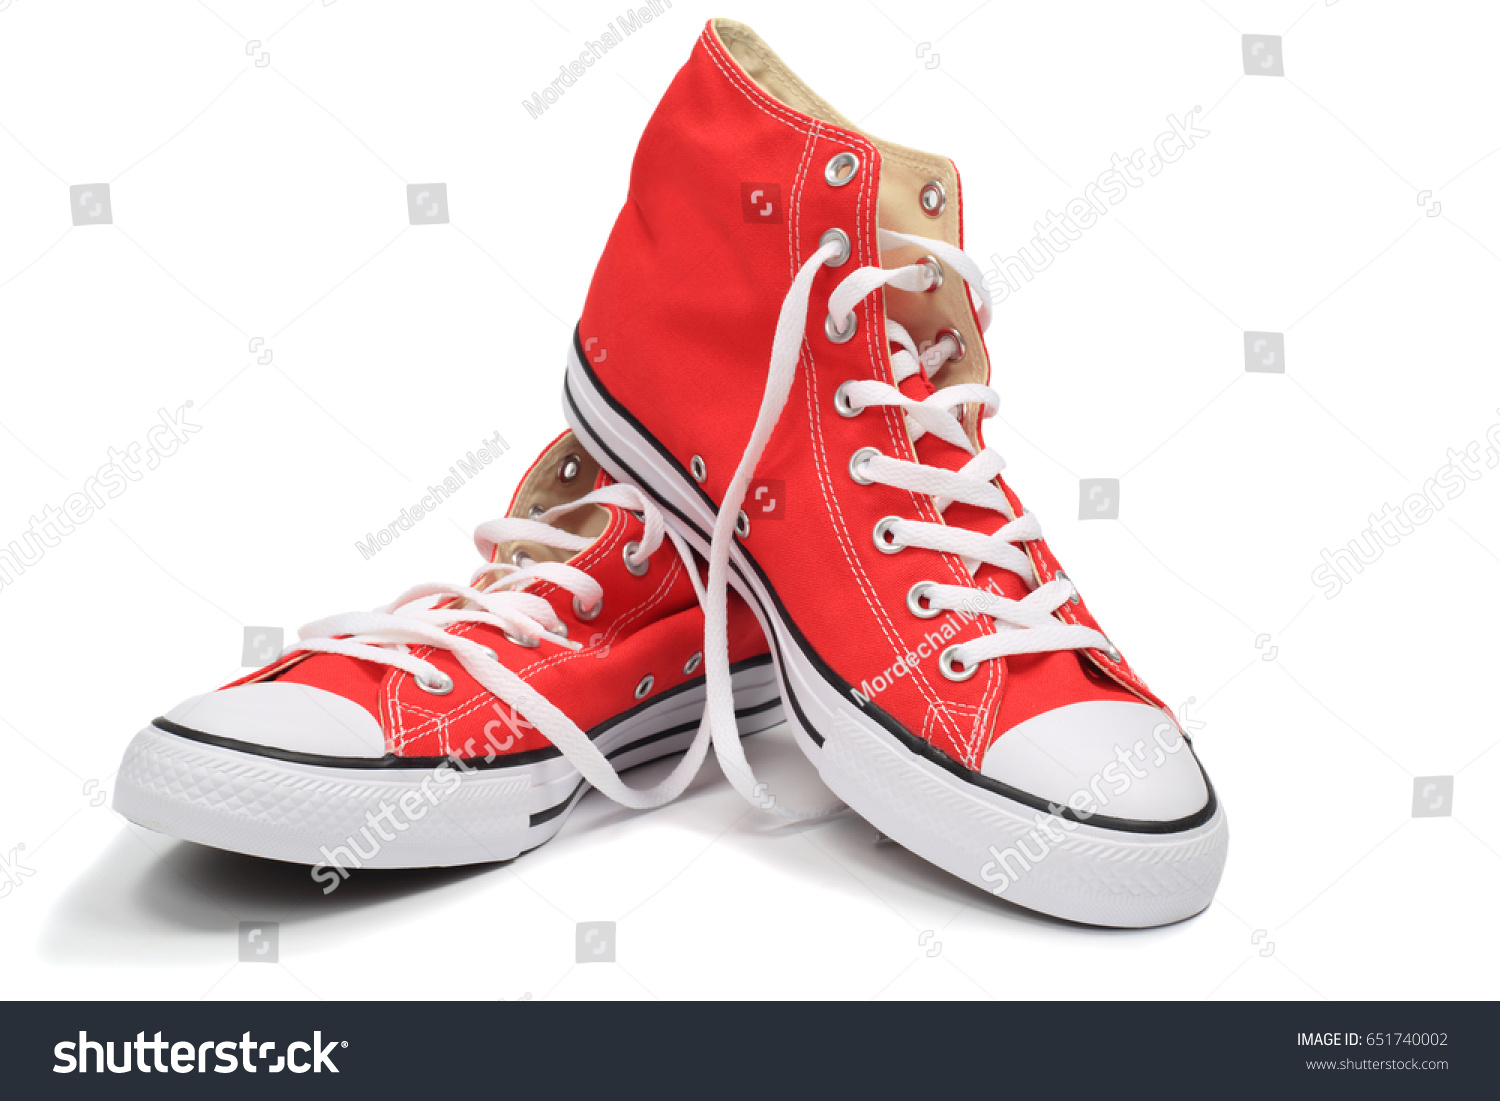 Red canvas sneakers, isolated with clipping path #651740002